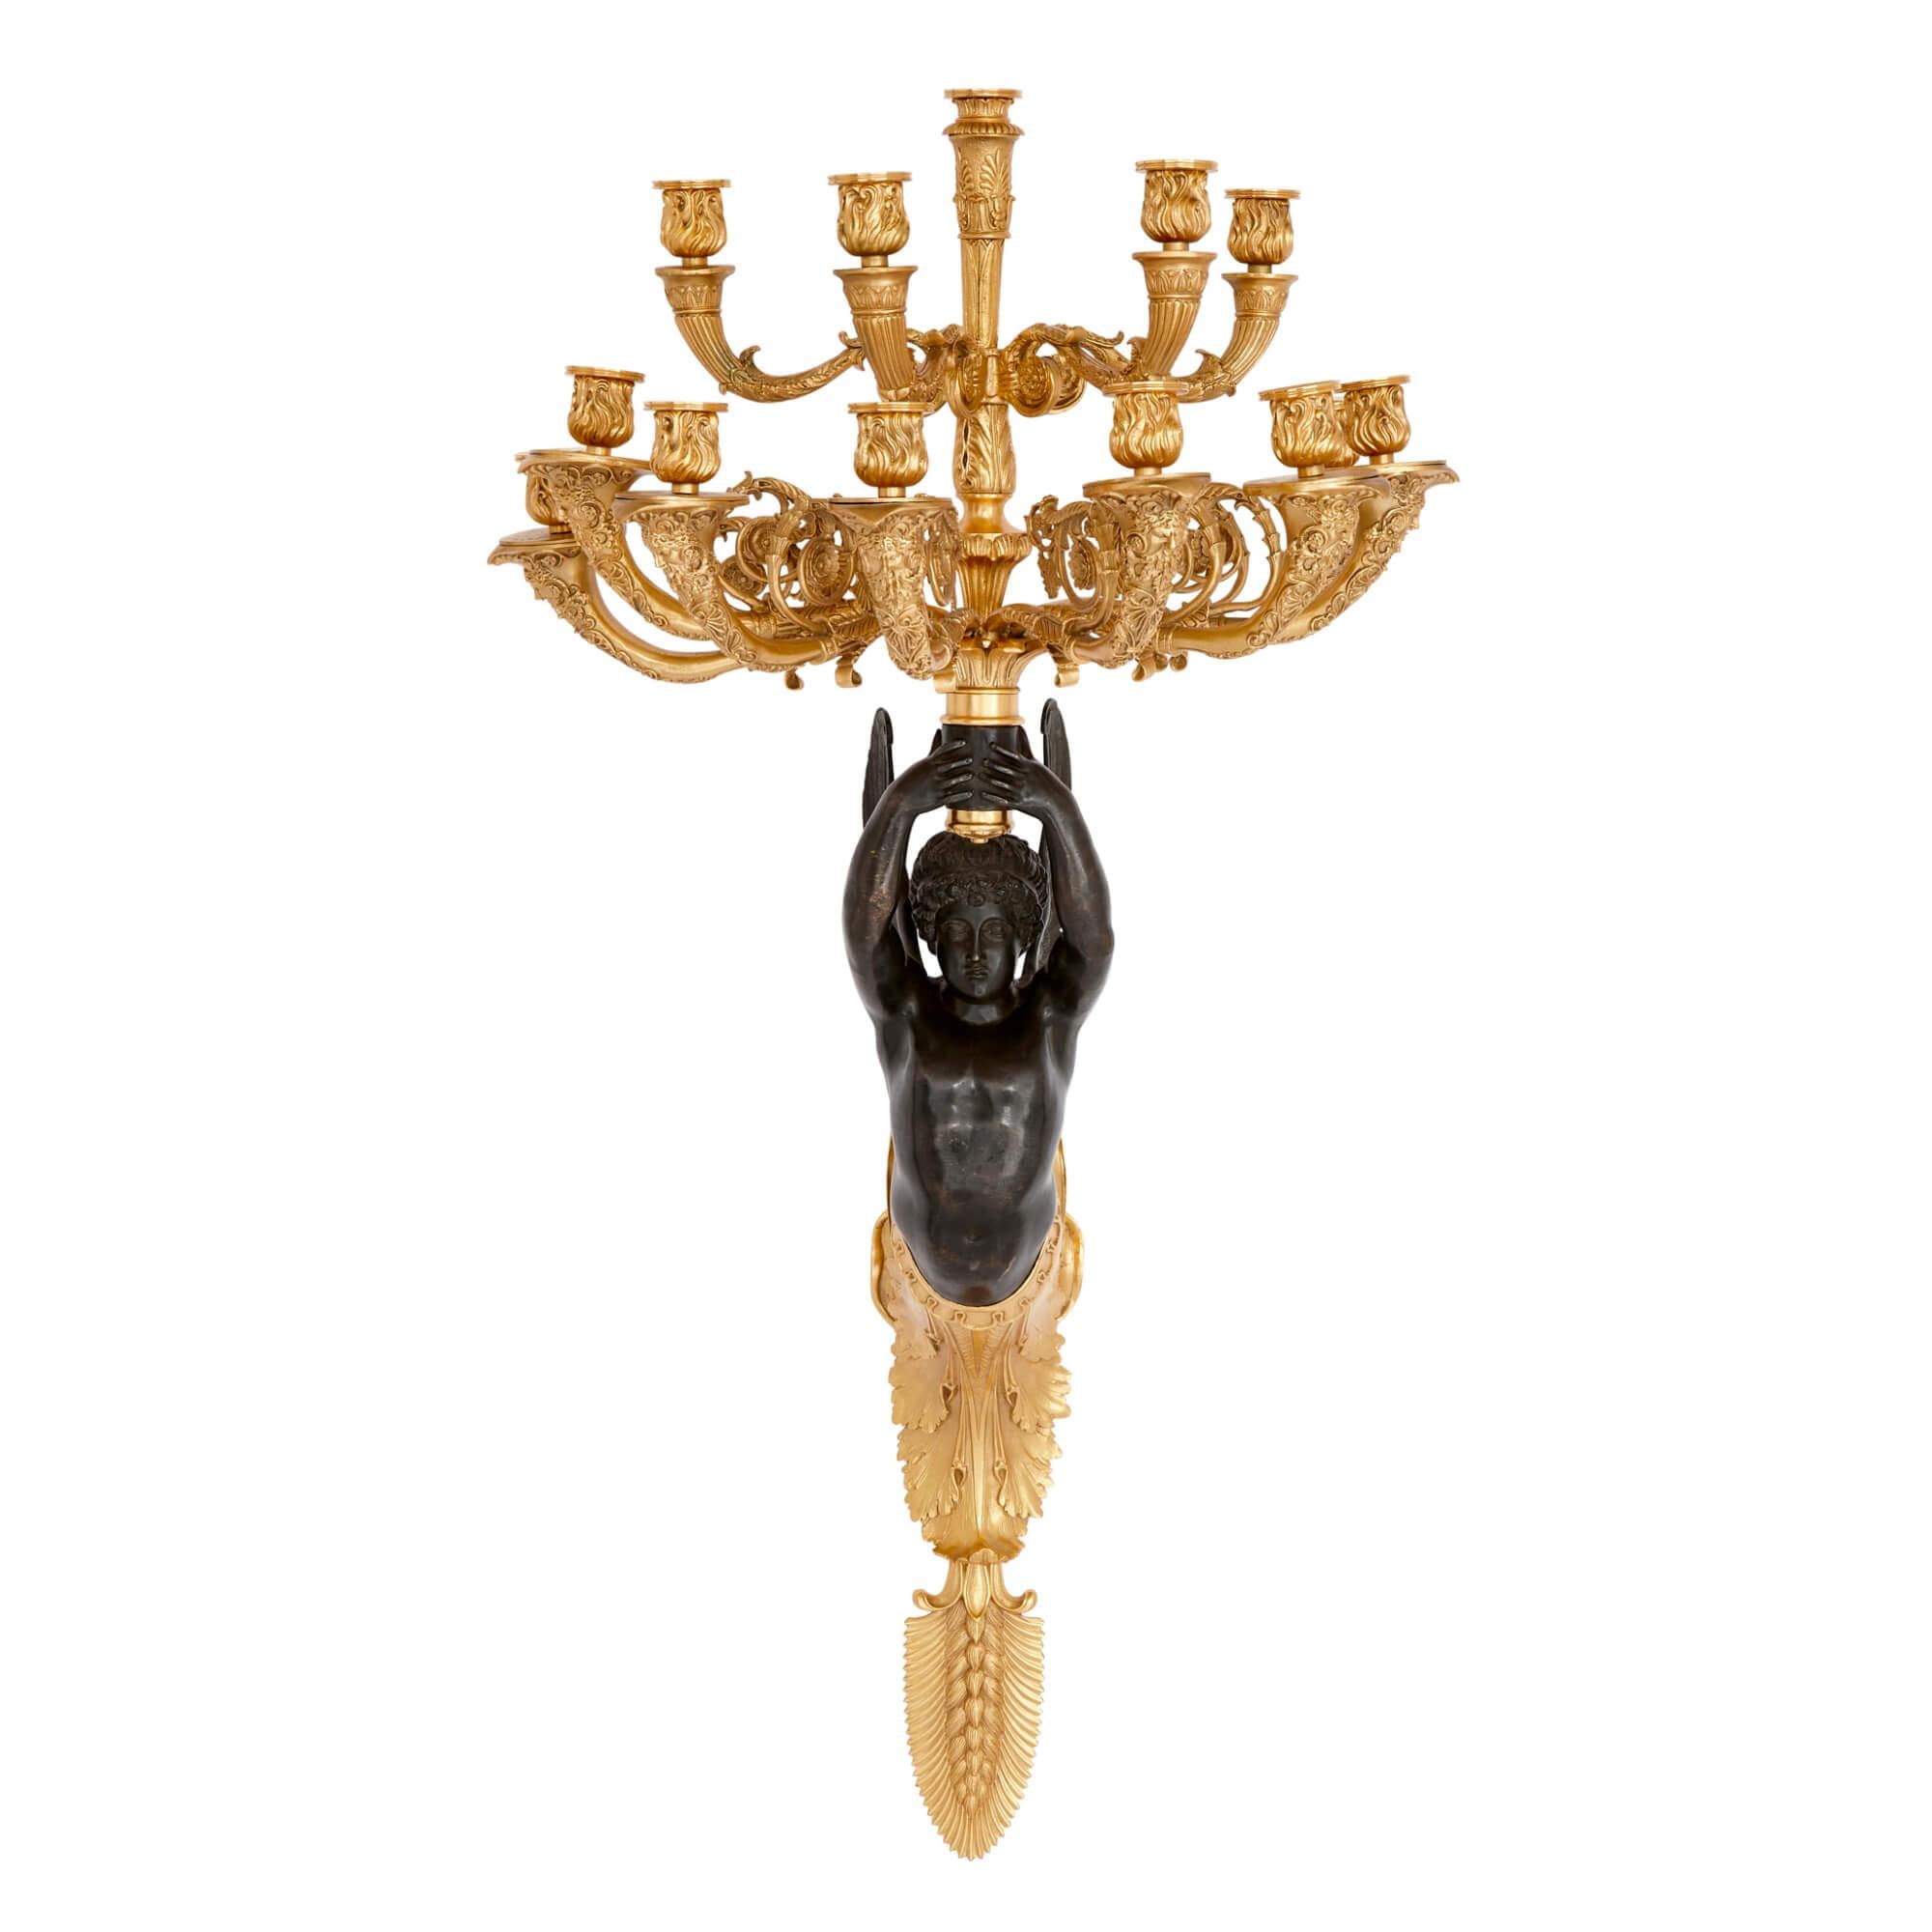 Pair of French gilt and patinated bronze wall lights
French, 20th Century
Height 103cm, width 50cm, depth 44cm

Drawing inspiration from the sophisticated Empire style, these wall lights are a brilliant showcase of artisanship. The stems, crafted